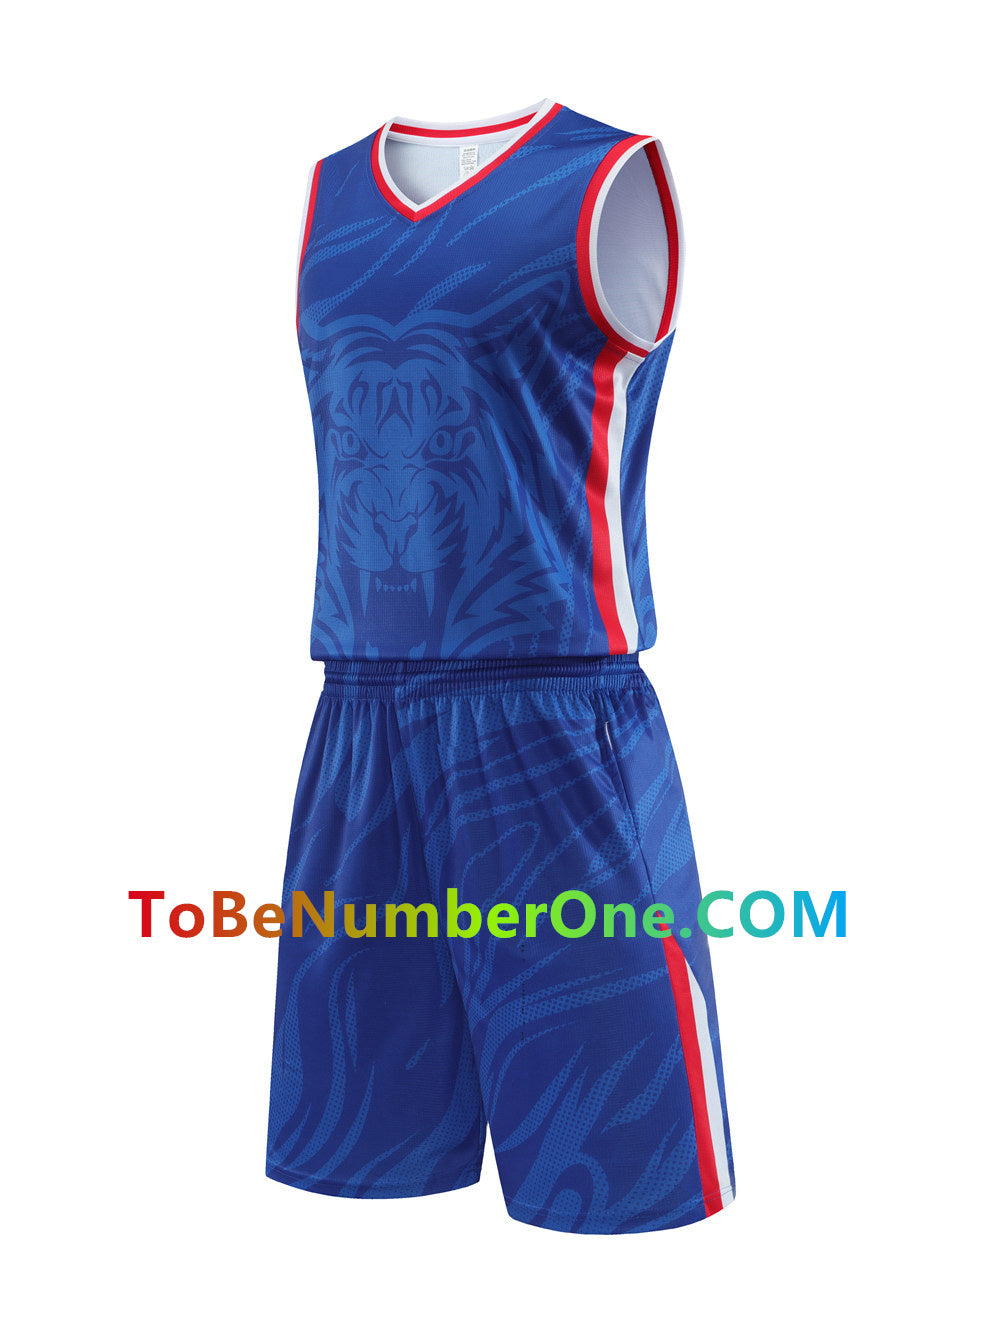 Customize instock High Quality Quick-drying basketball uniforms print with team name , player and number.  jerseys&shorts with pocket 230#print with team name , player and number.